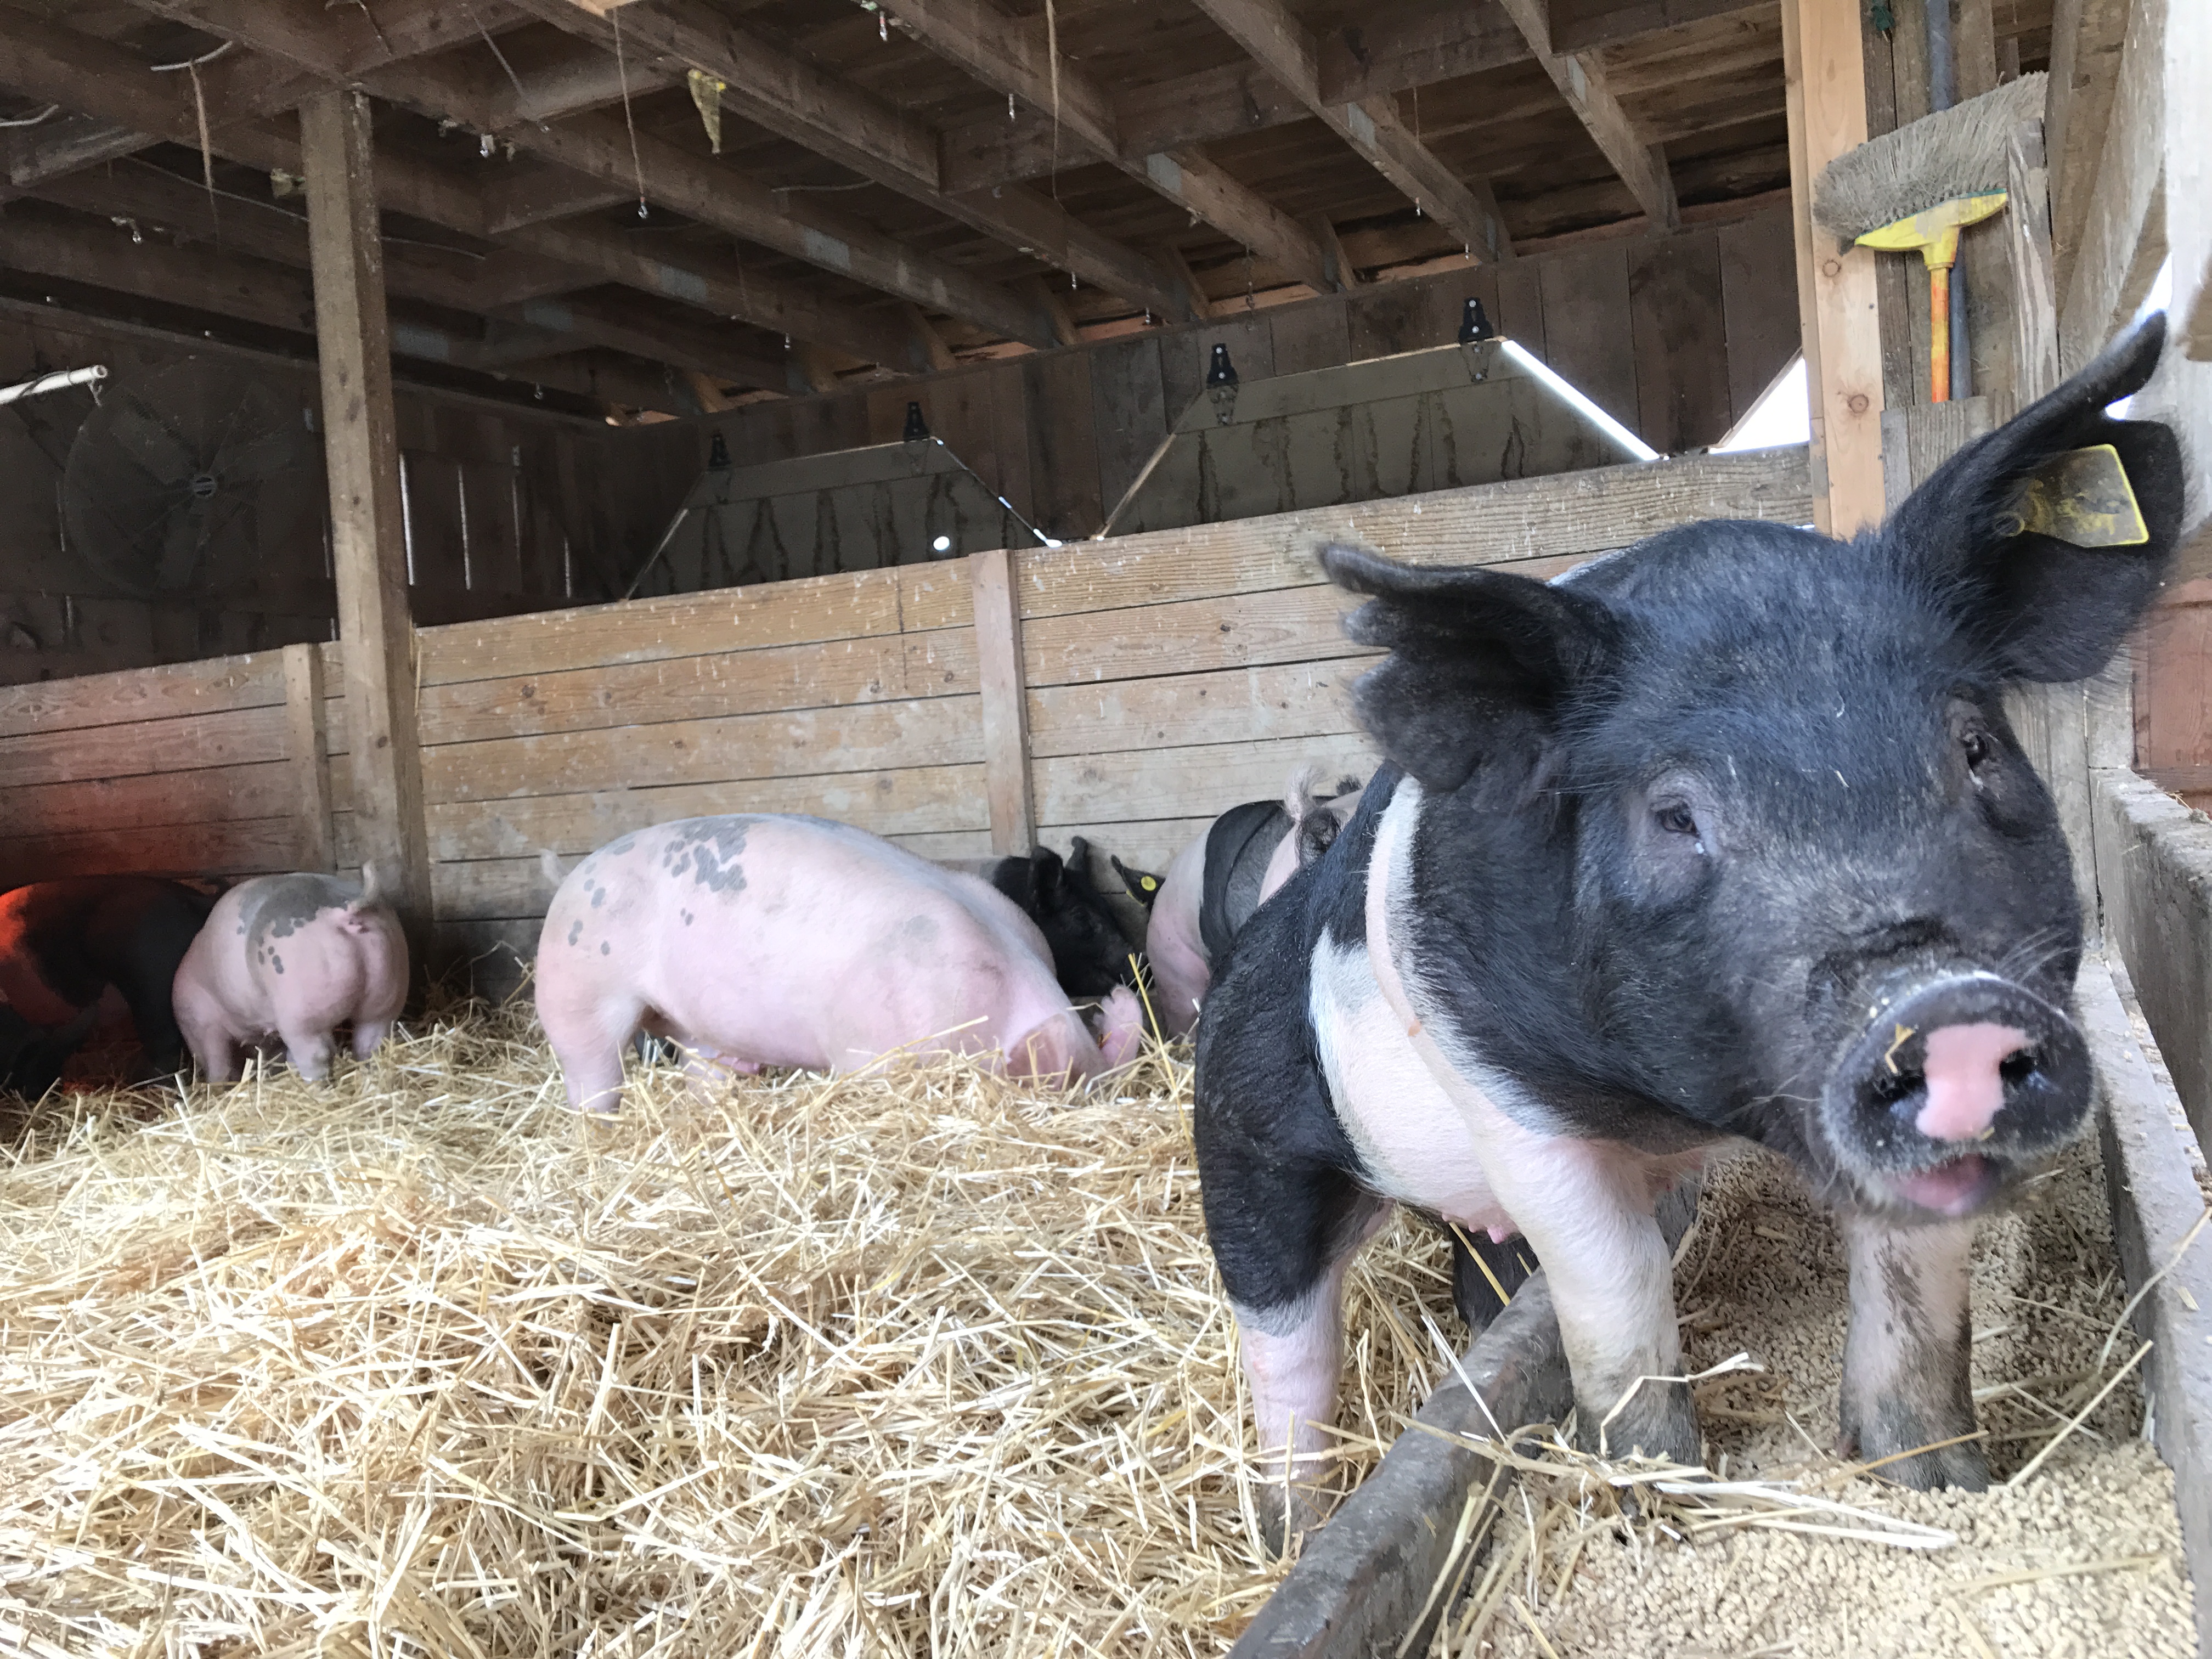 Inside the pig pen at Historic Wagner Farm.